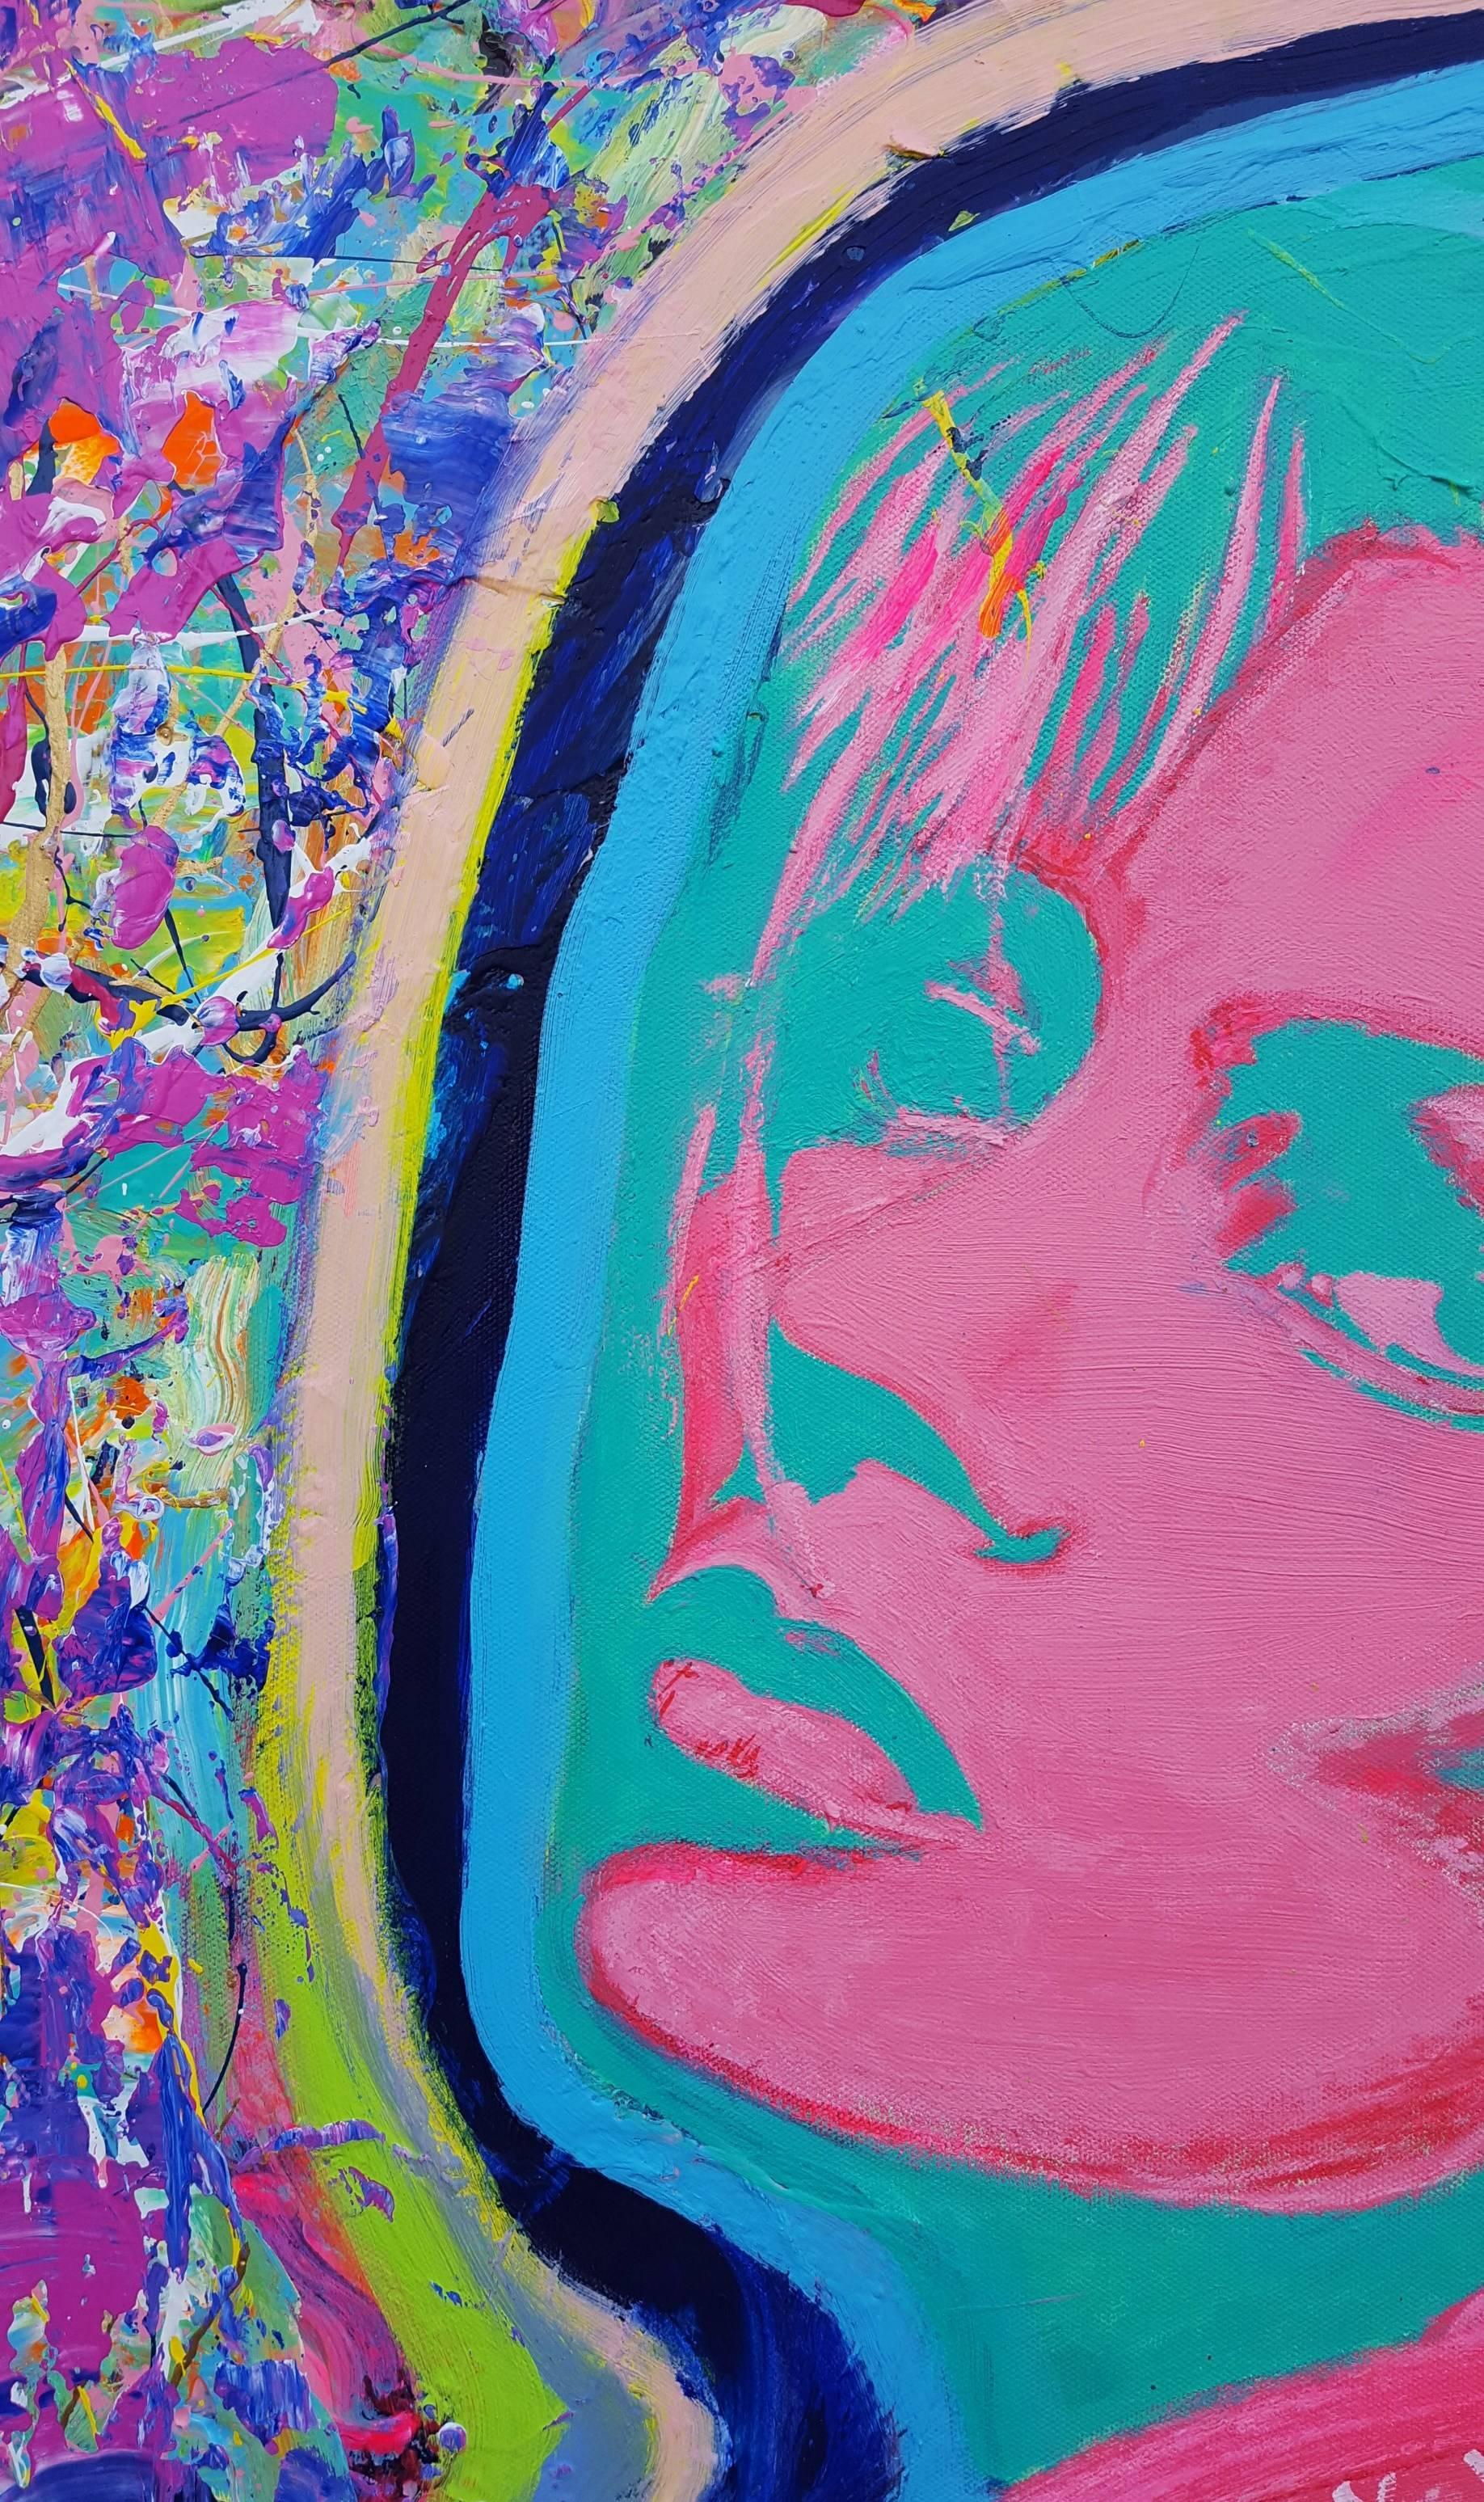 Kate Moss Icon (Sunbather) - Painting by Jack Graves III